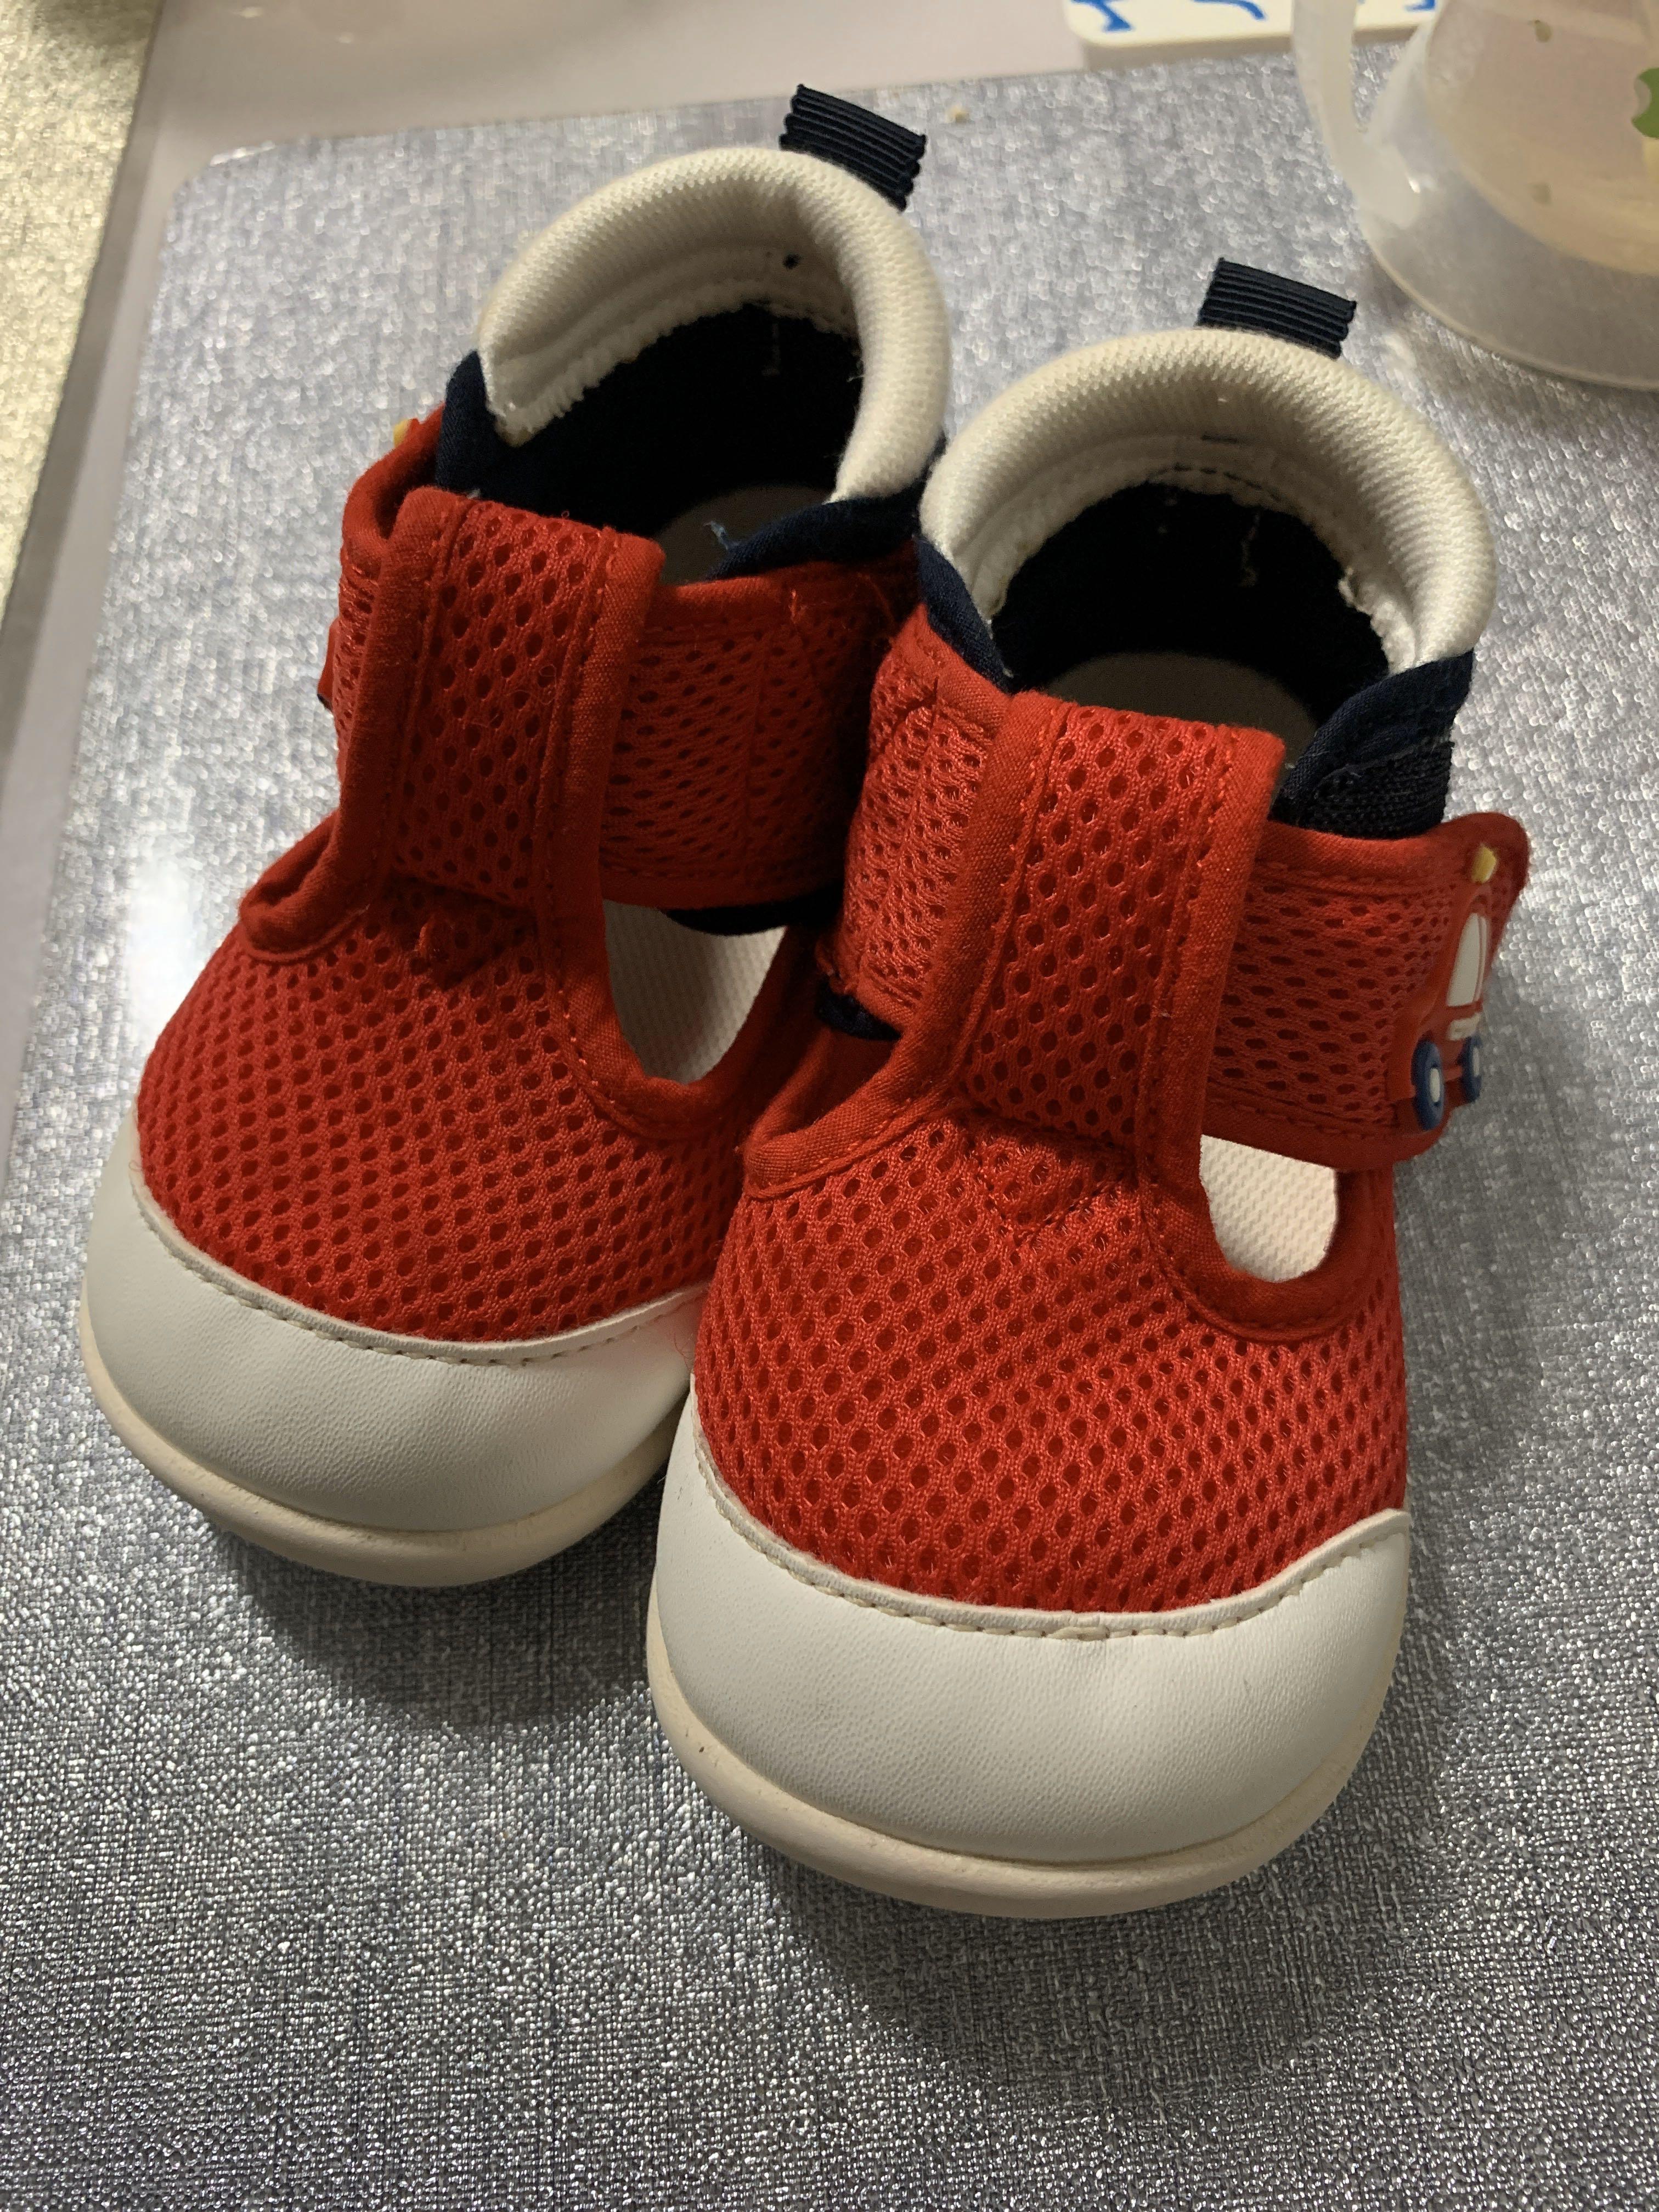 size 3 baby shoes in cm